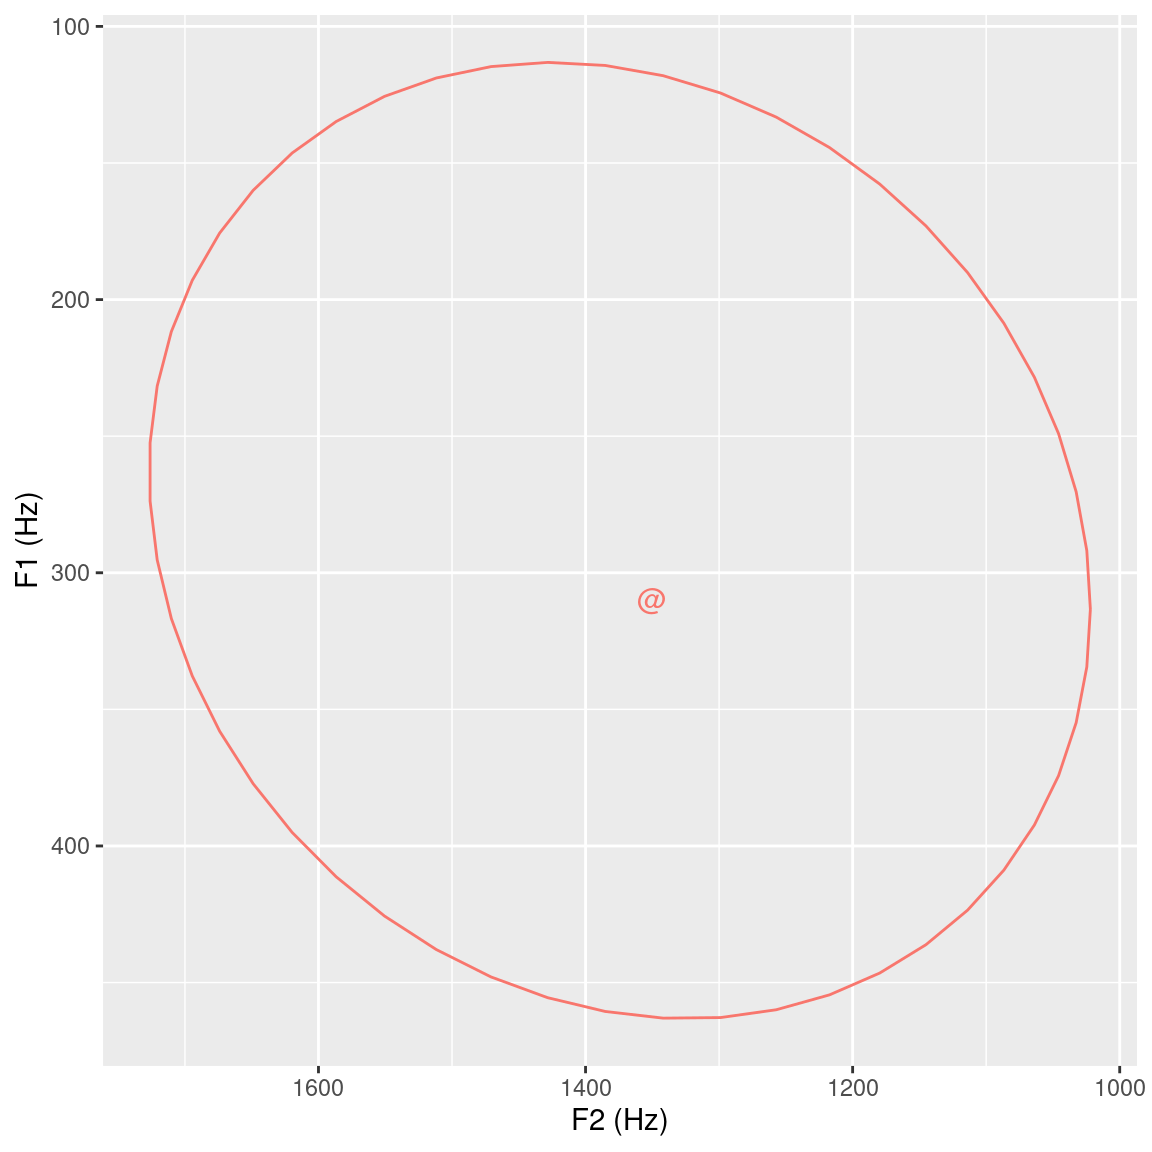 95% ellipse plot including centroid for F2 x F1 data extracted from the temporal midpoint of the vowel segments.